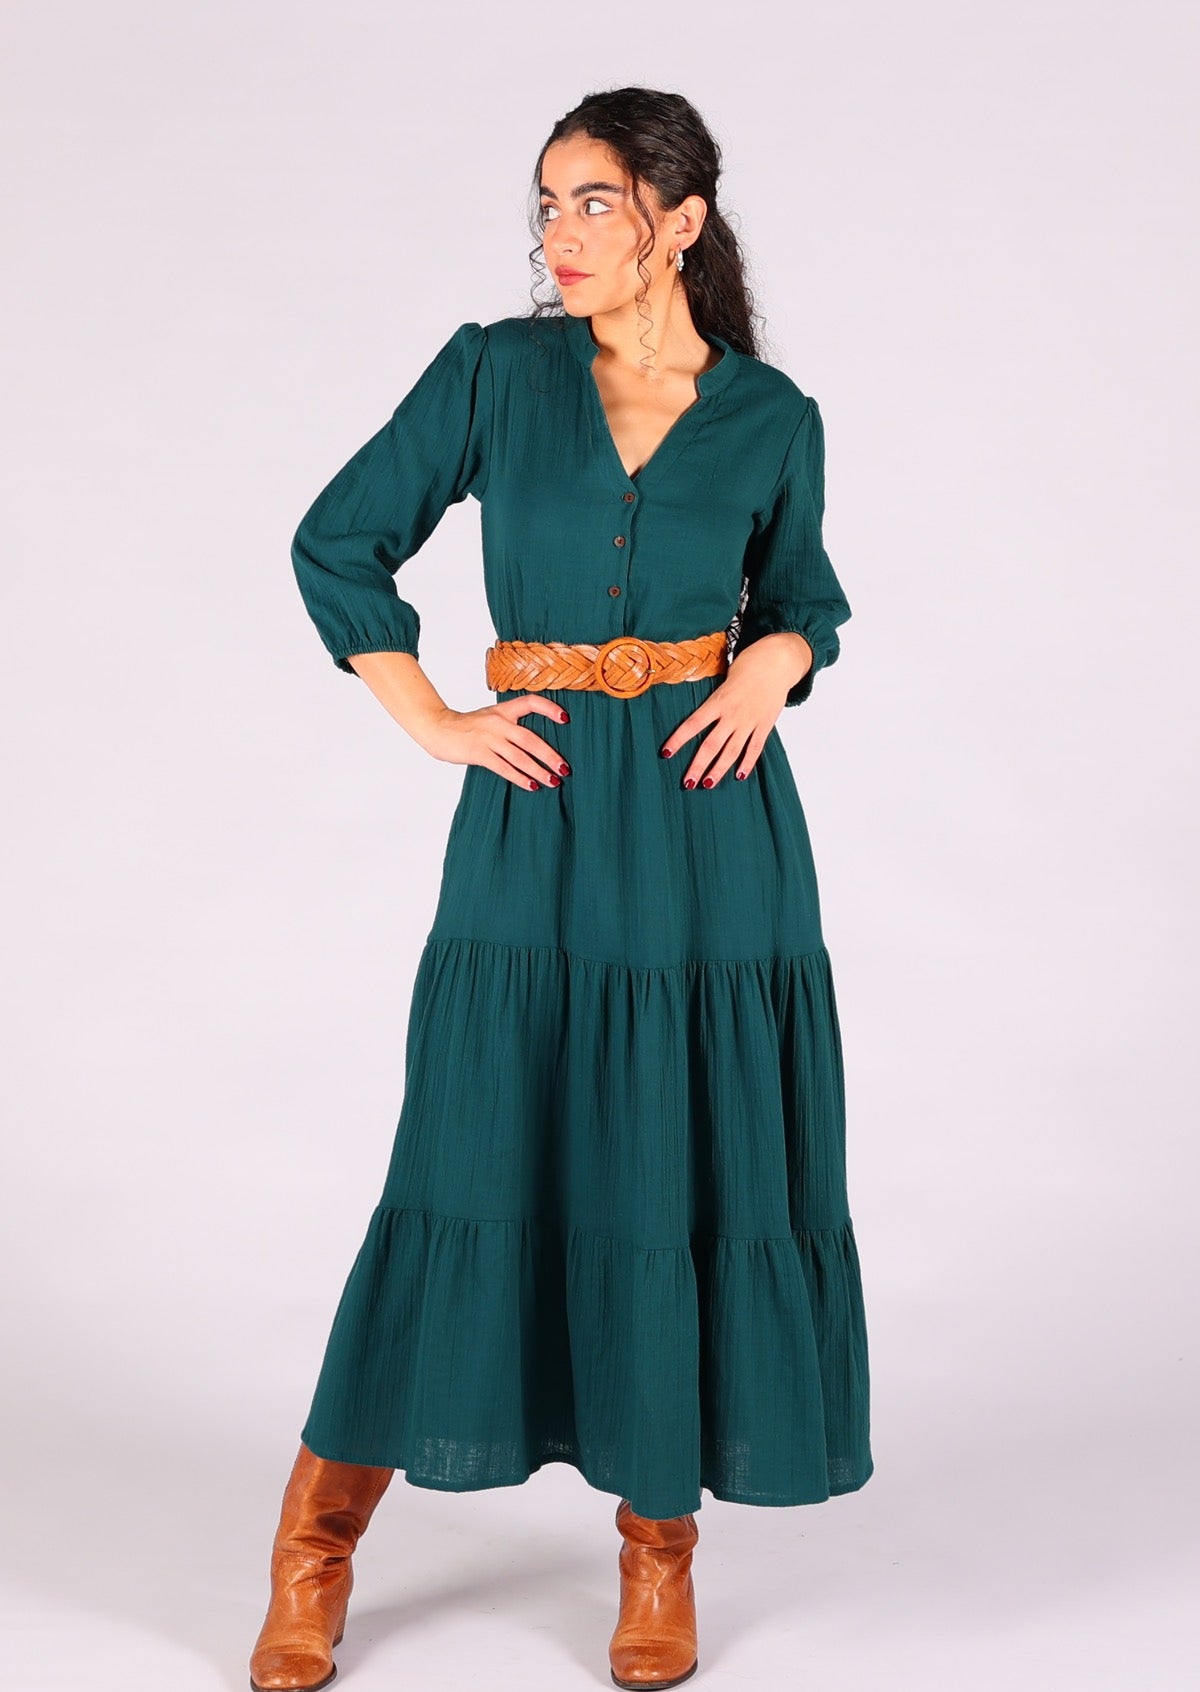 Stunning double cotton tiered dress with buttoned bodice with V-neckline and mandarin collar